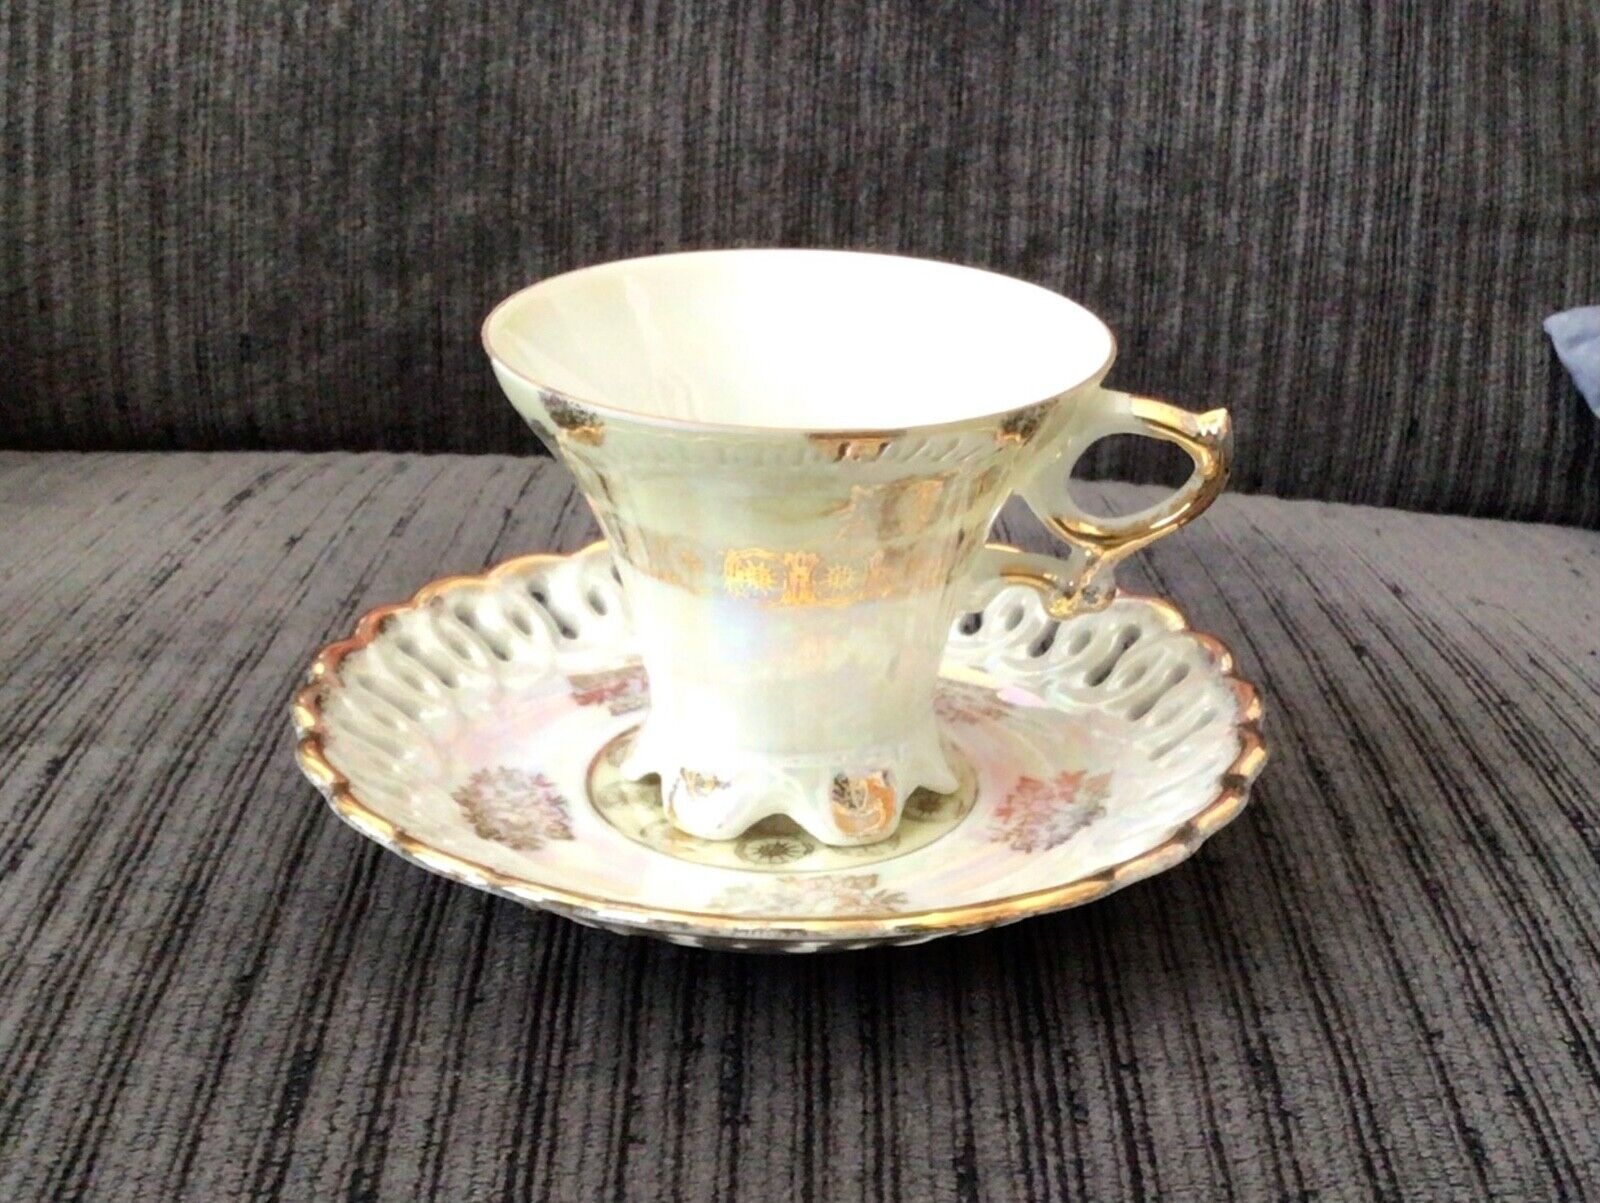 VINTAGE ROYAL CROWN TEA CUP & SAUCER  WHITE IRIDESCENT & GOLD 